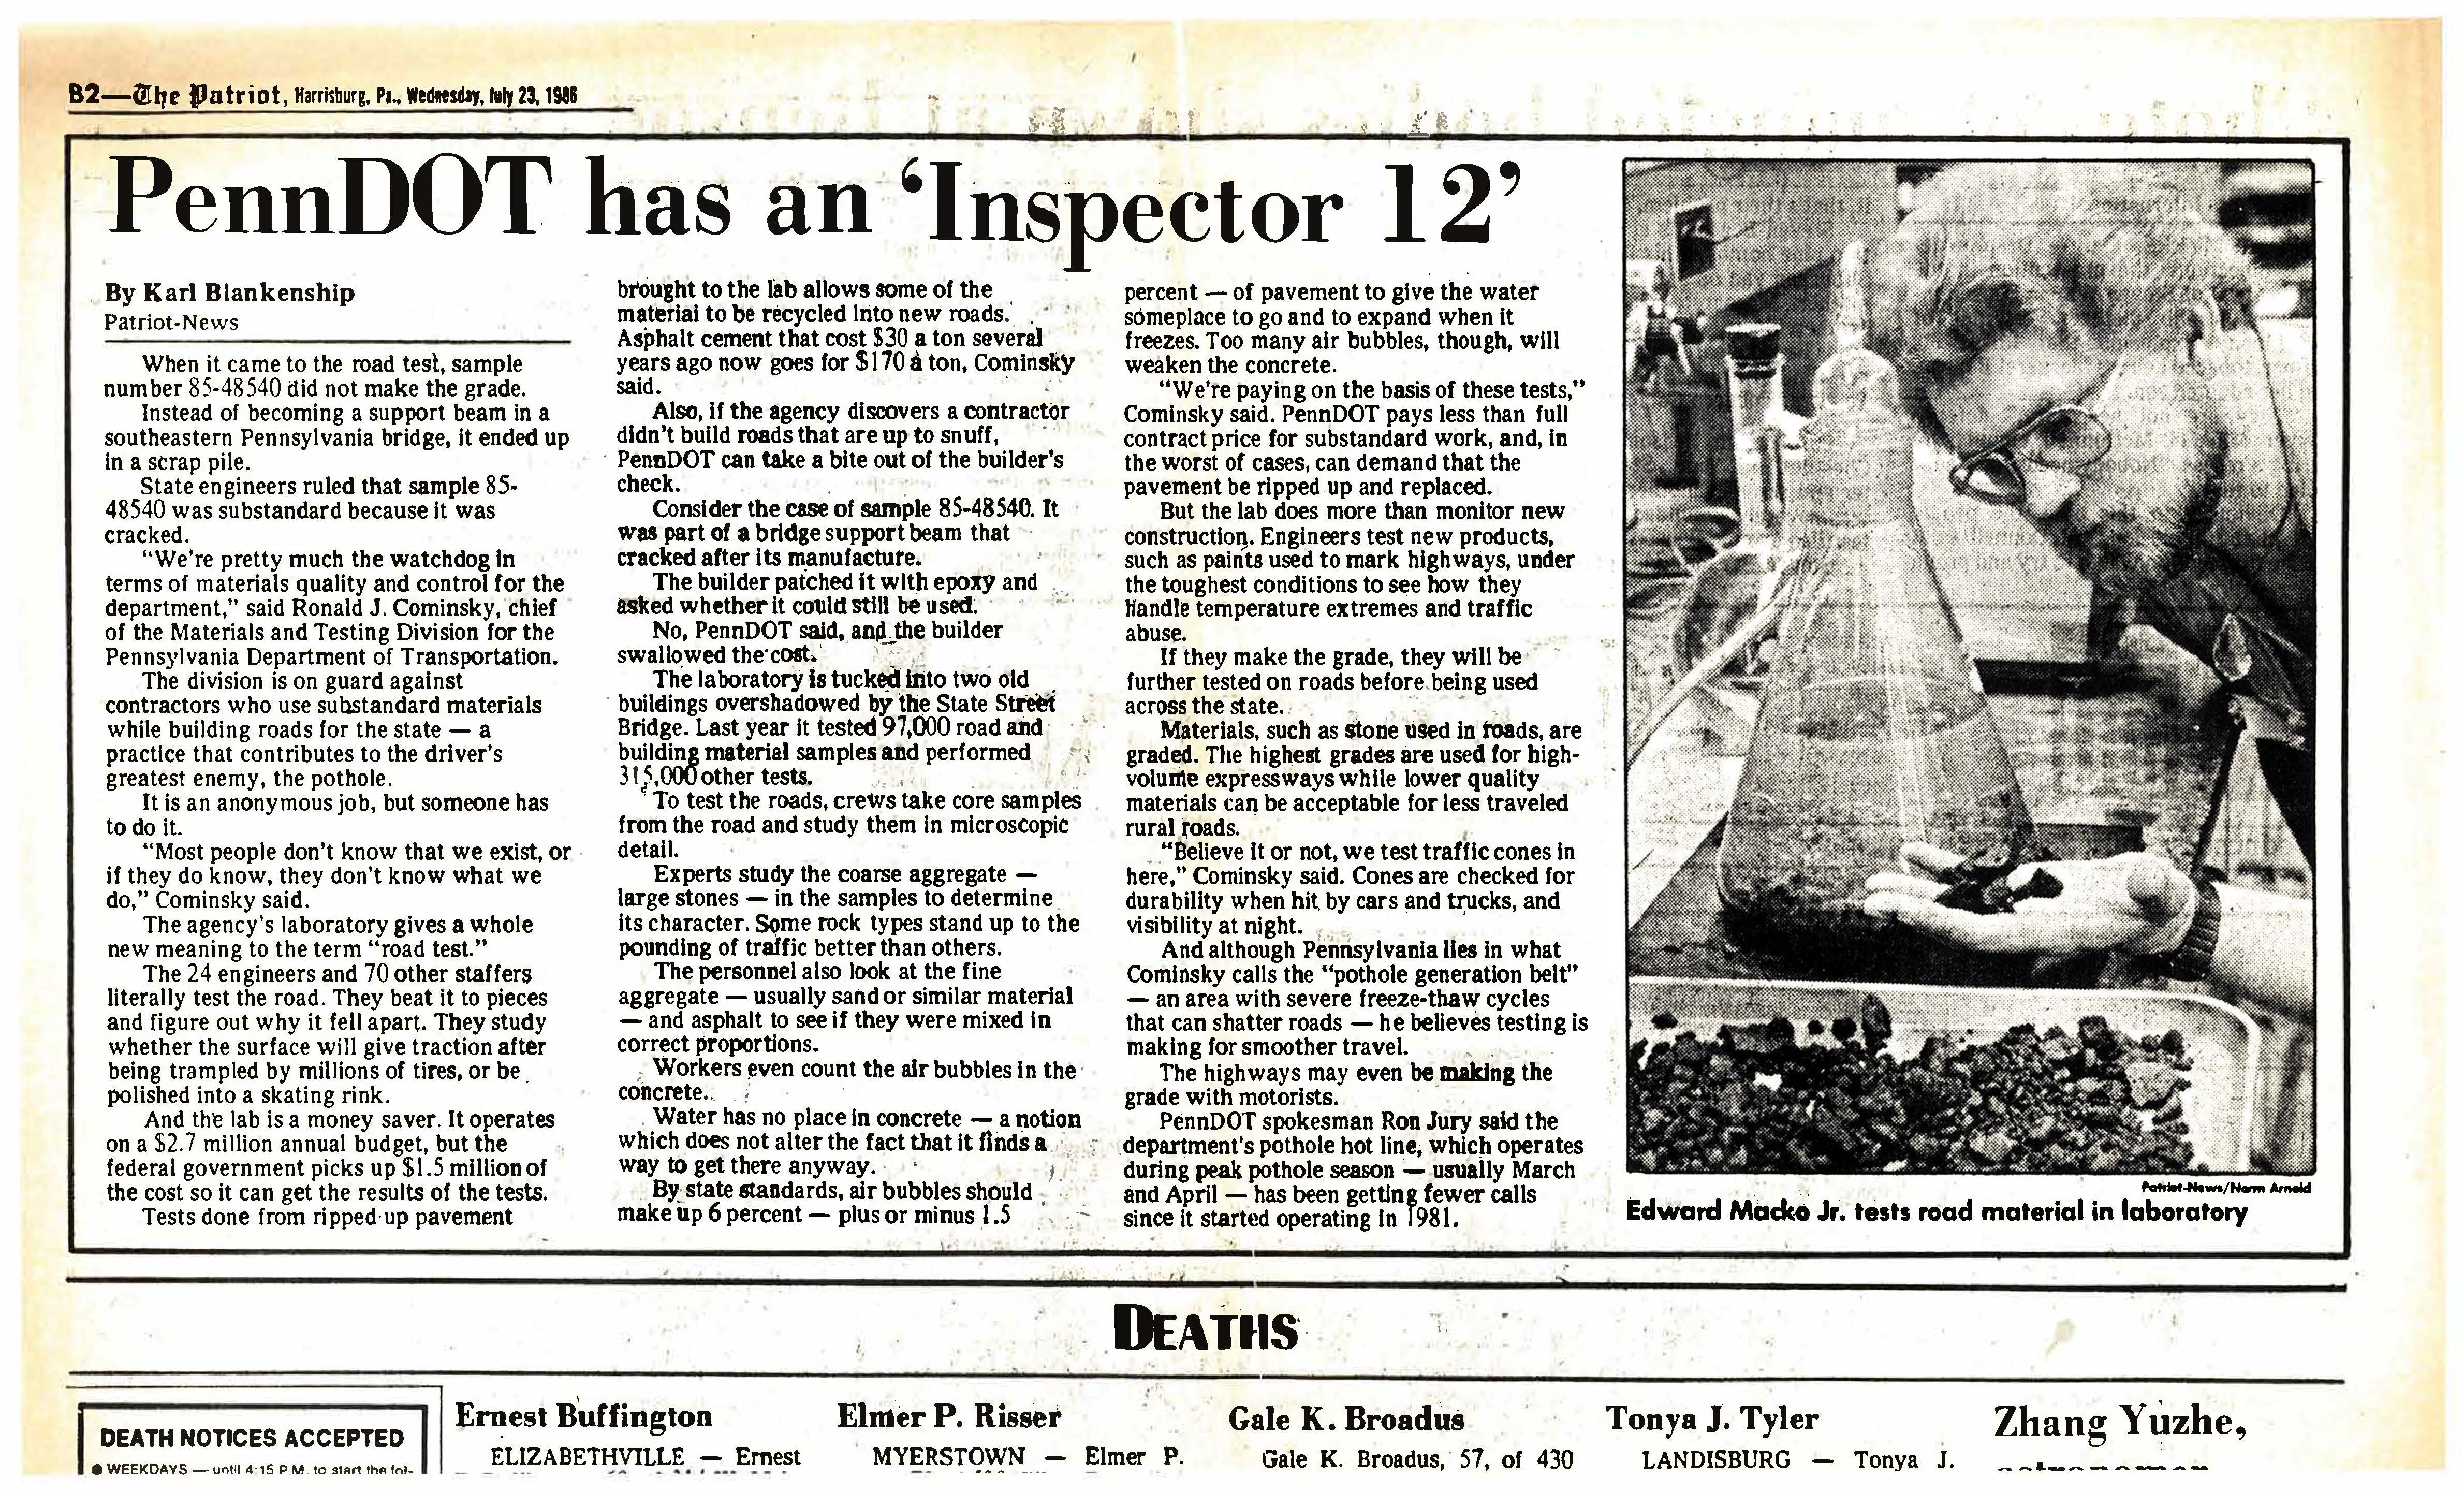 scan of old article about PennDOT